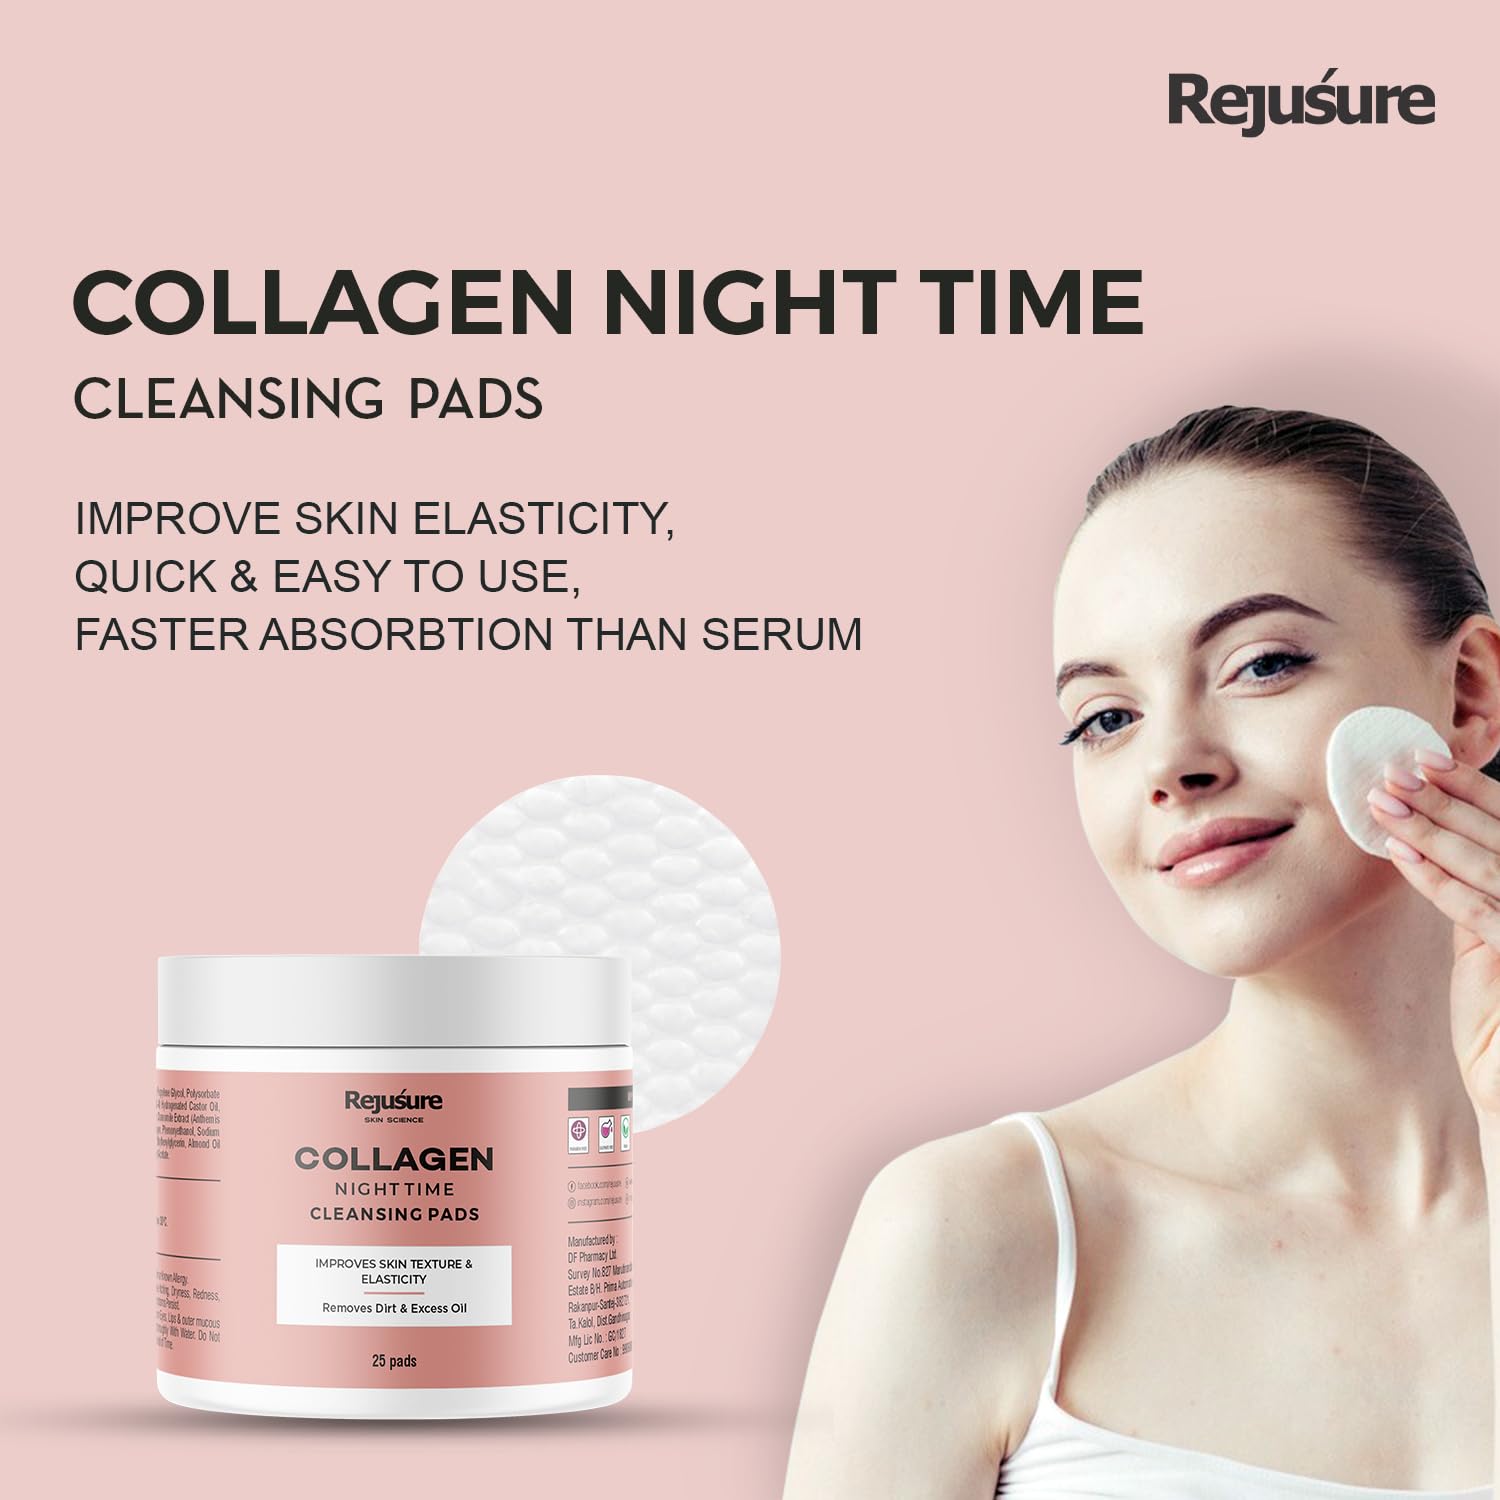 Rejusure Collagen Night Time Cleansing Pads Improves Skin Texture & Skin Elasticity Removes Dirt & Excess Oil |Enrich with Chamomile Extract, Collagen & Almond Oil | Women & Men | - 25 Pads